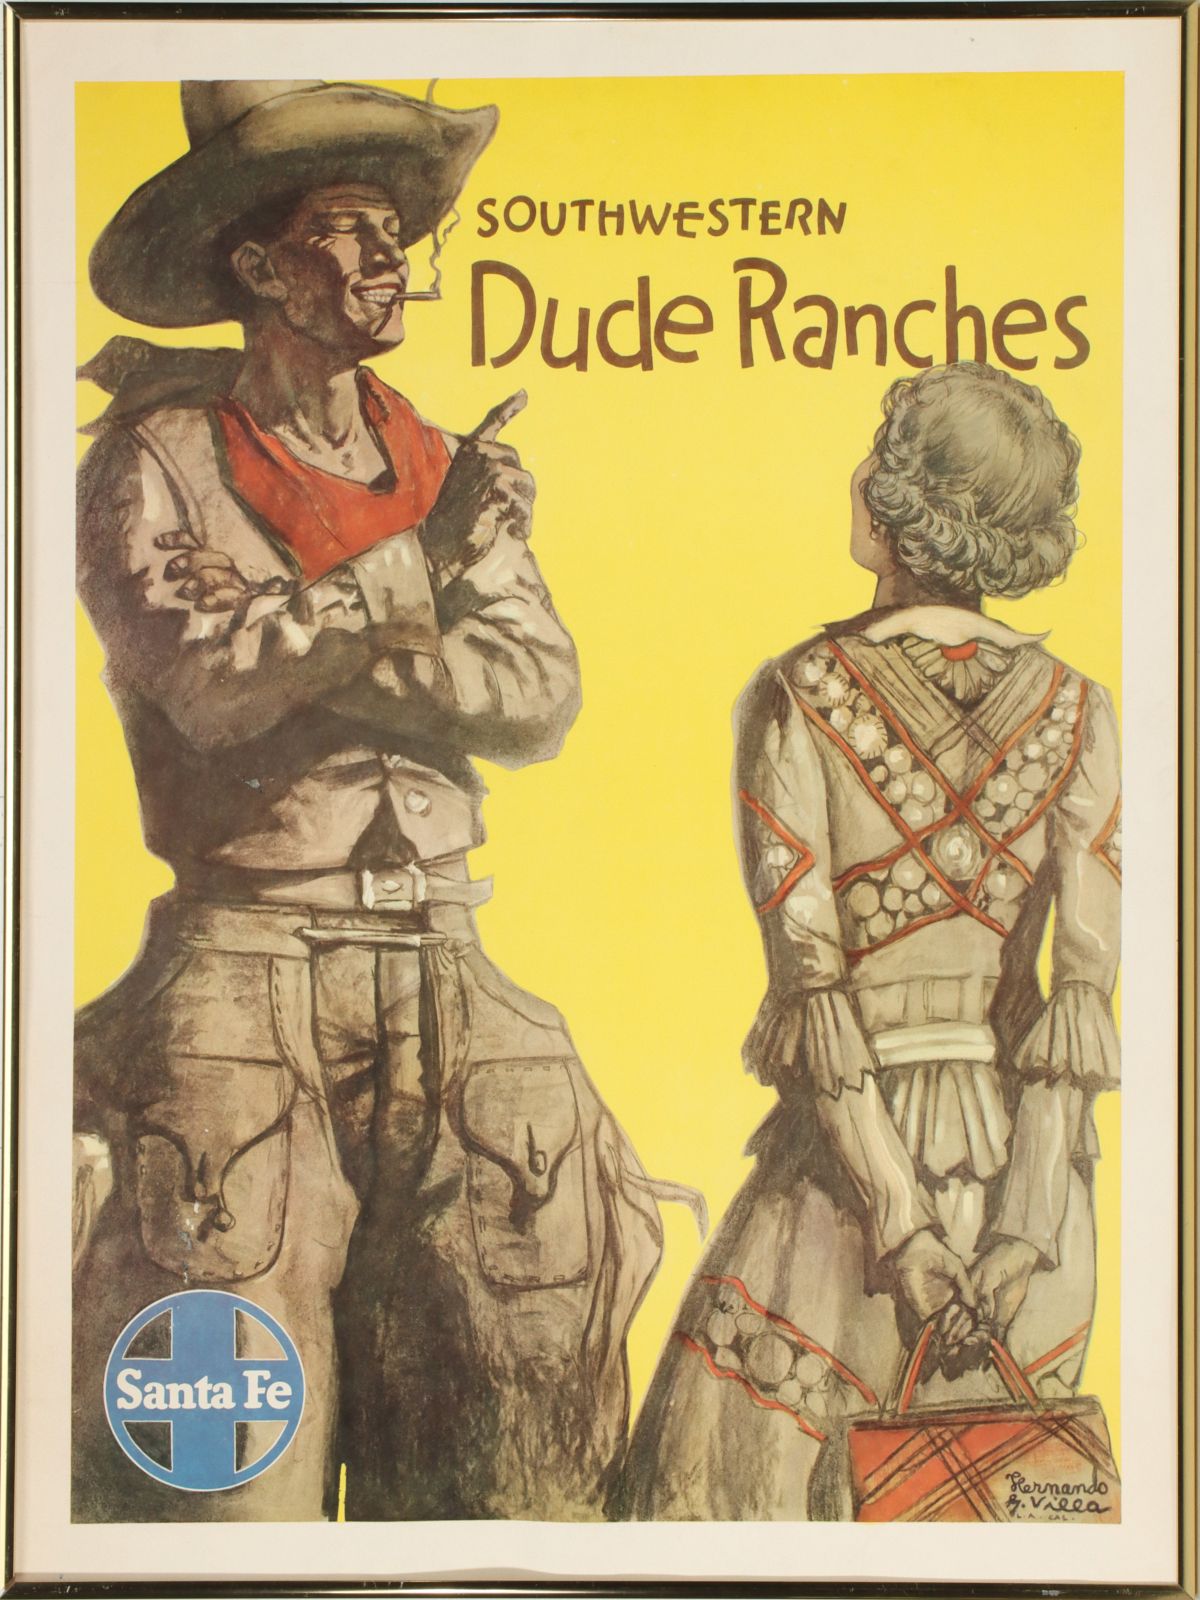 AN A.T.&S.F. TRAVEL POSTER FOR WESTERN DUDE RANCHES